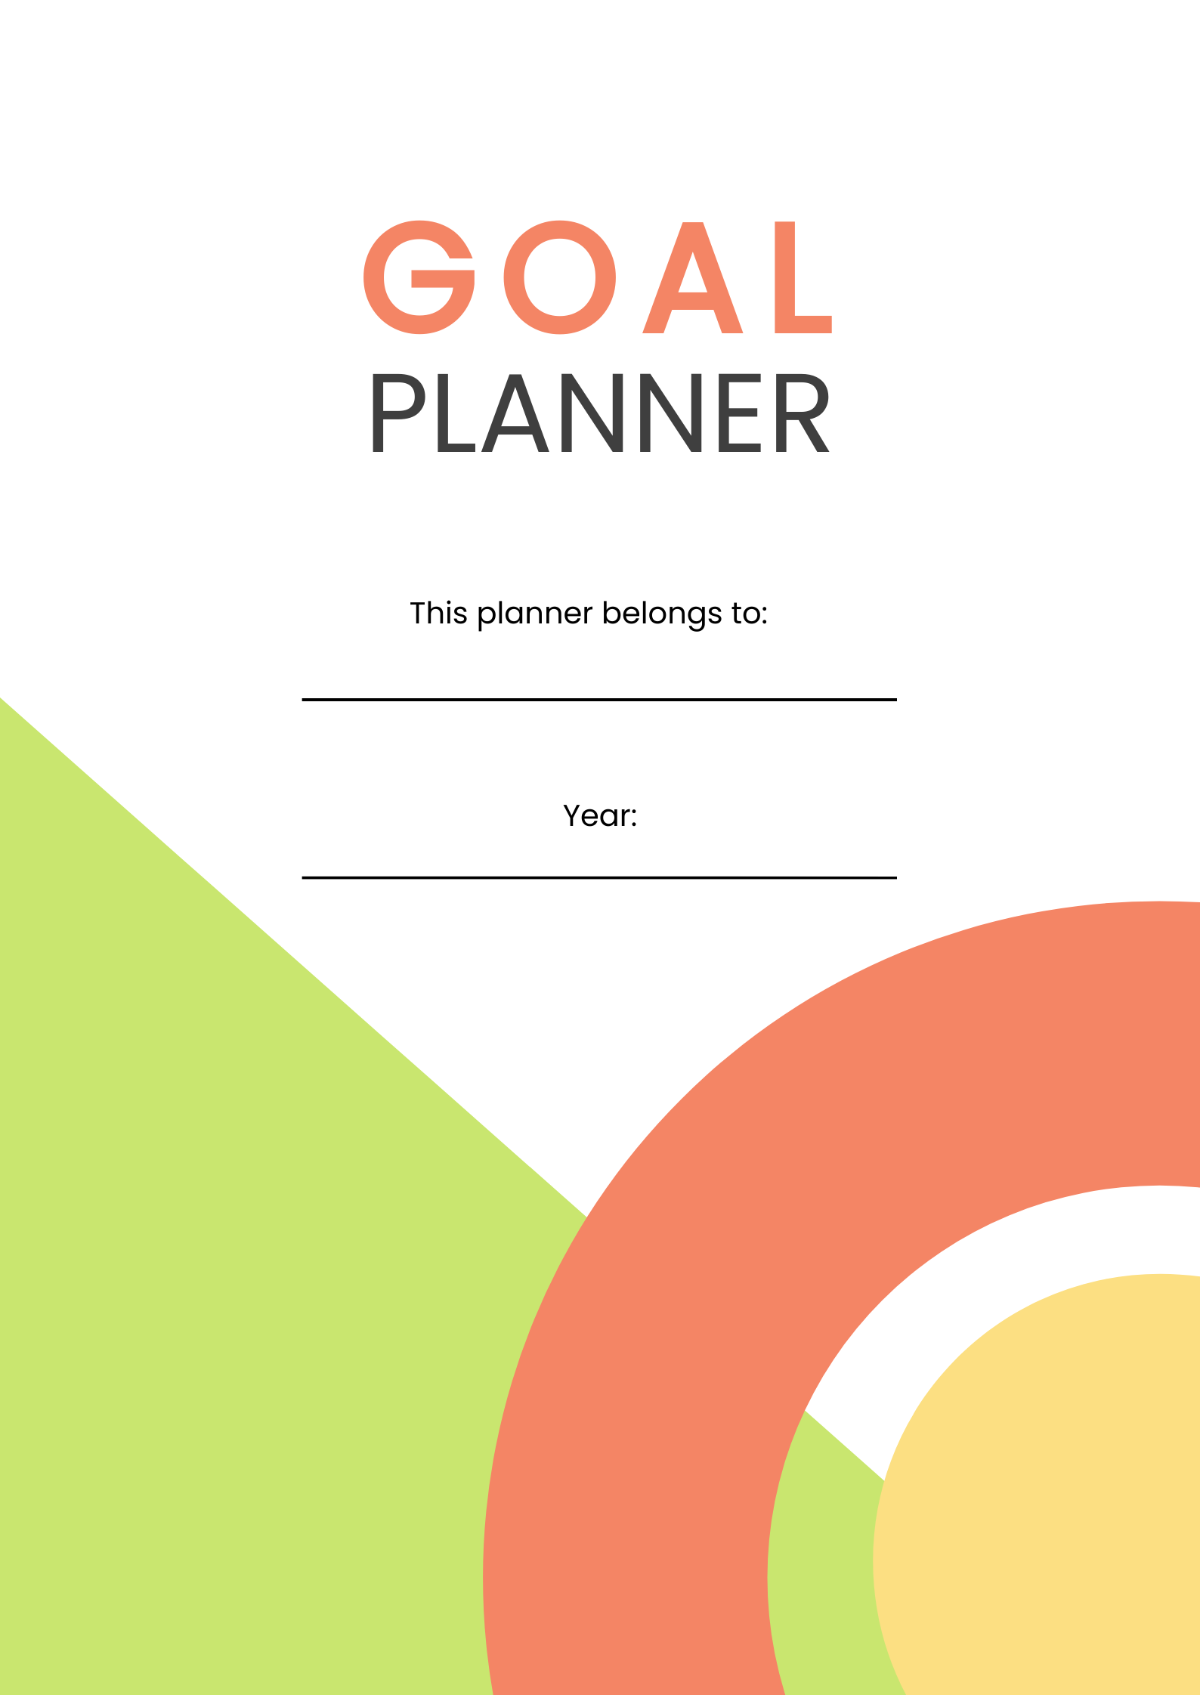 Free Simple Goal Planner Template